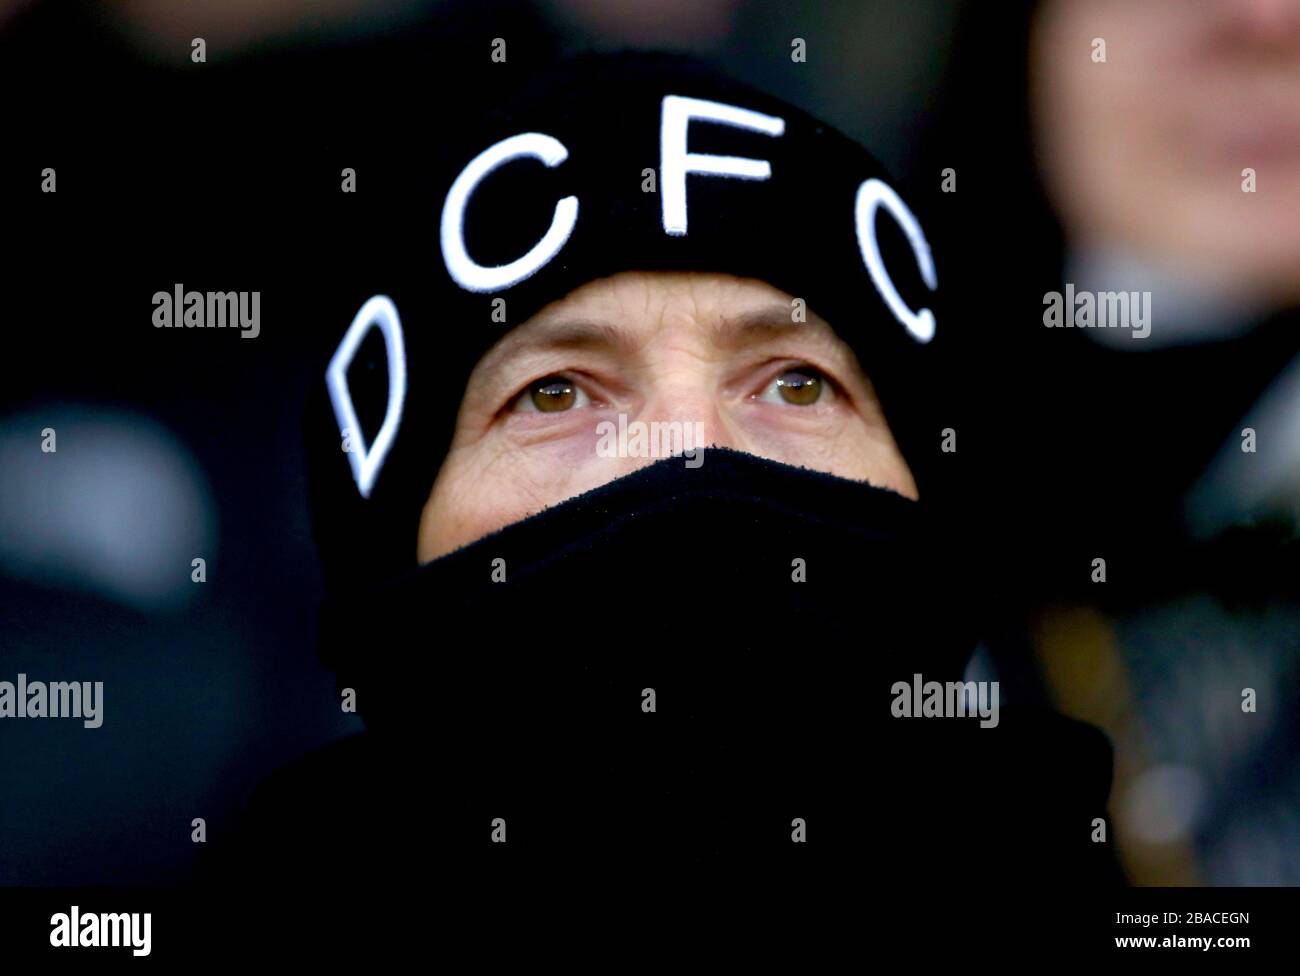 A Derby County fan in the stands during the match Stock Photo